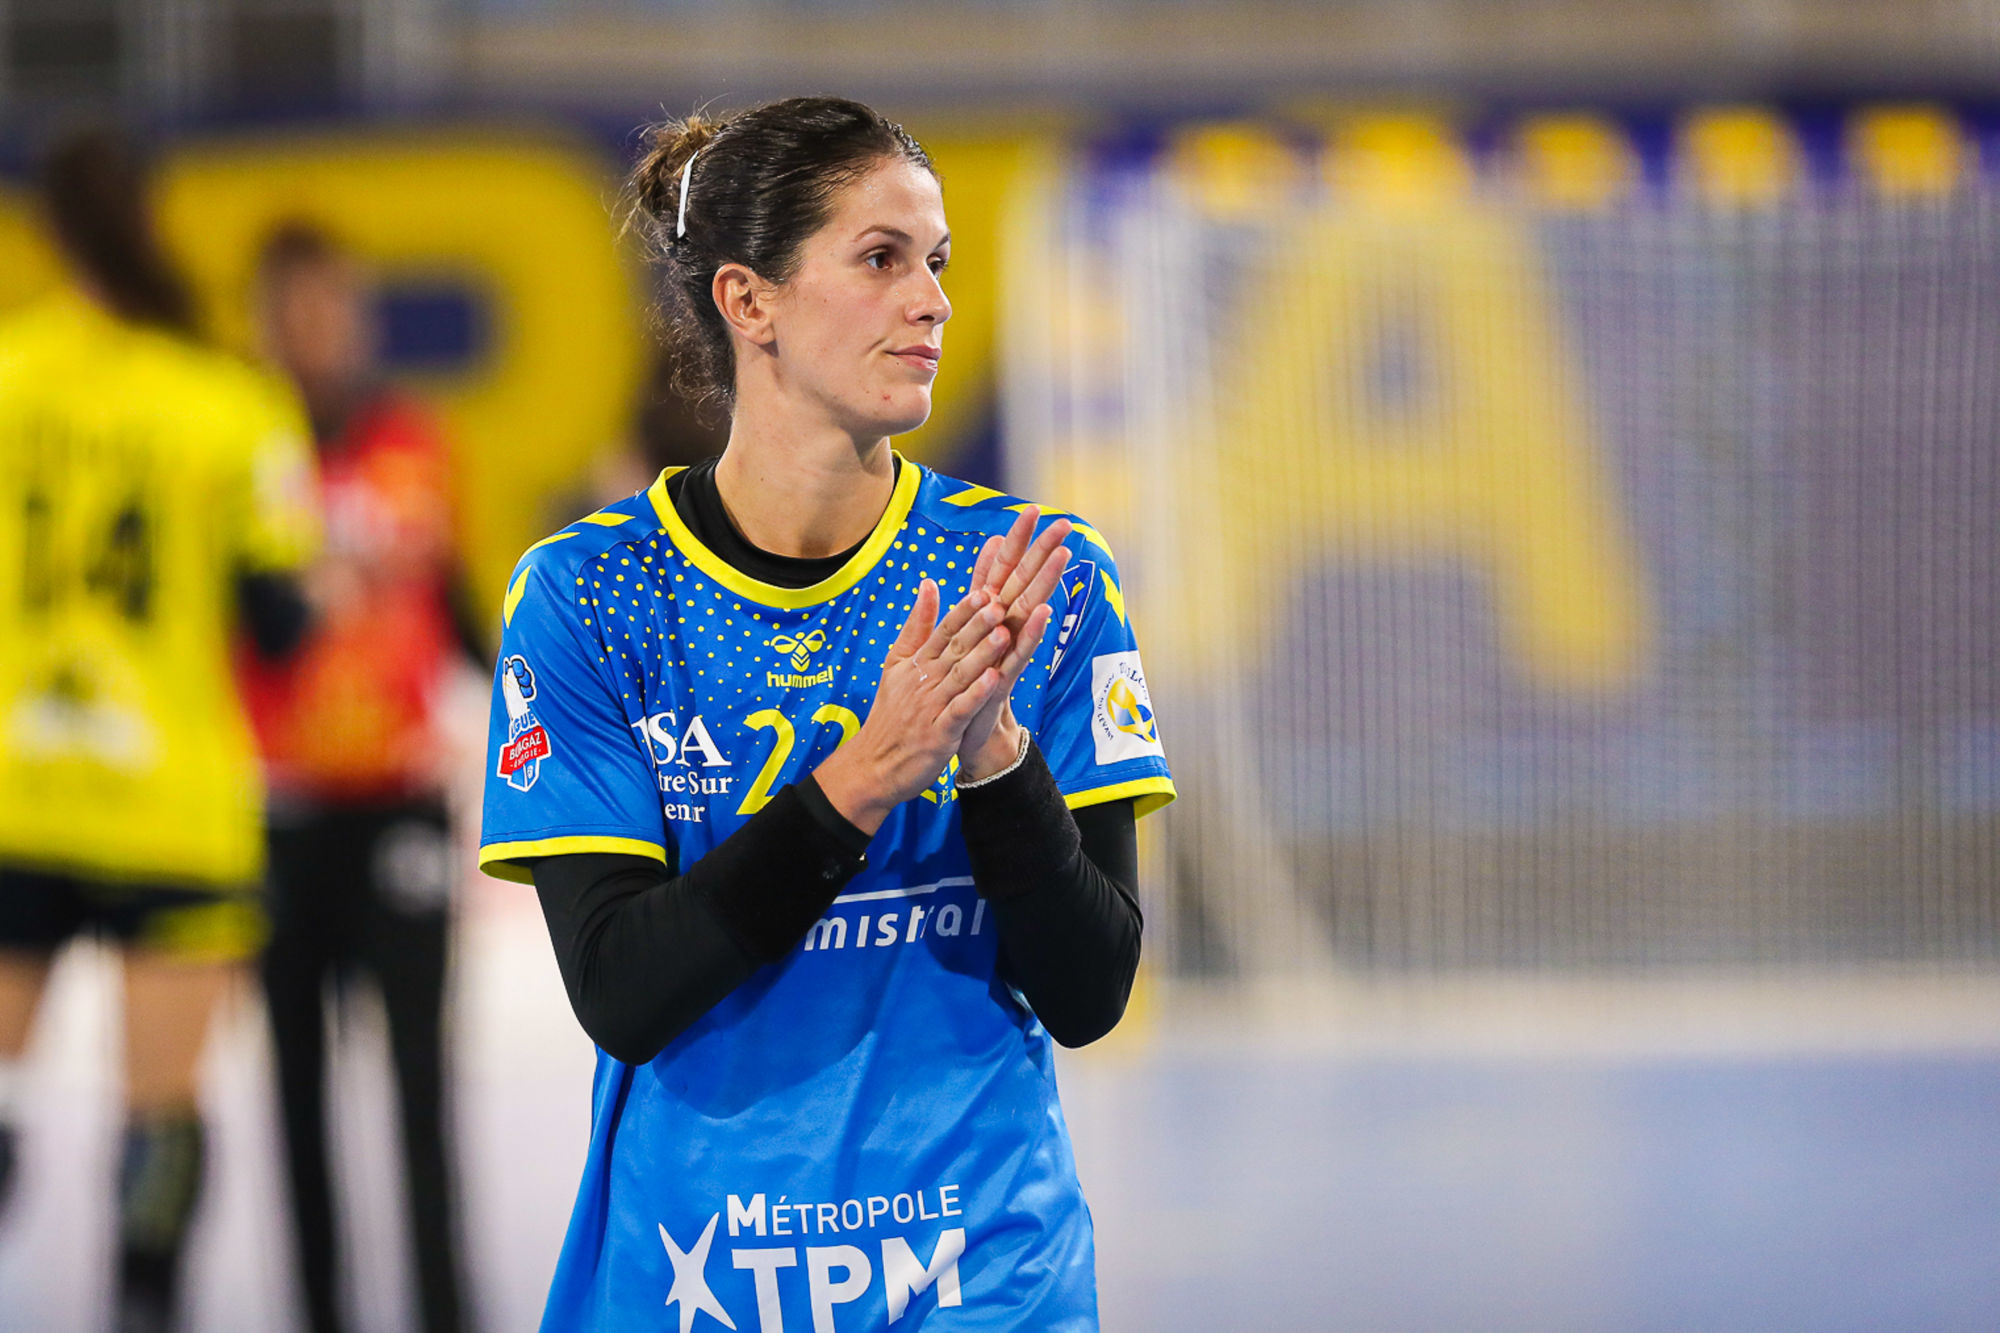 Agustina Lopez Santa Marina of Toulon Metropole Var Handball during the Ligue Butagaz Energie match between Toulon and Plan de Cuques at Palais des Sports Jaureguiberry on November 3, 2021 in Toulon, France. (Photo by Bertrand Delhomme/Icon Sport) - Agustina Lopez SANTAMARINA - Toulon (France)